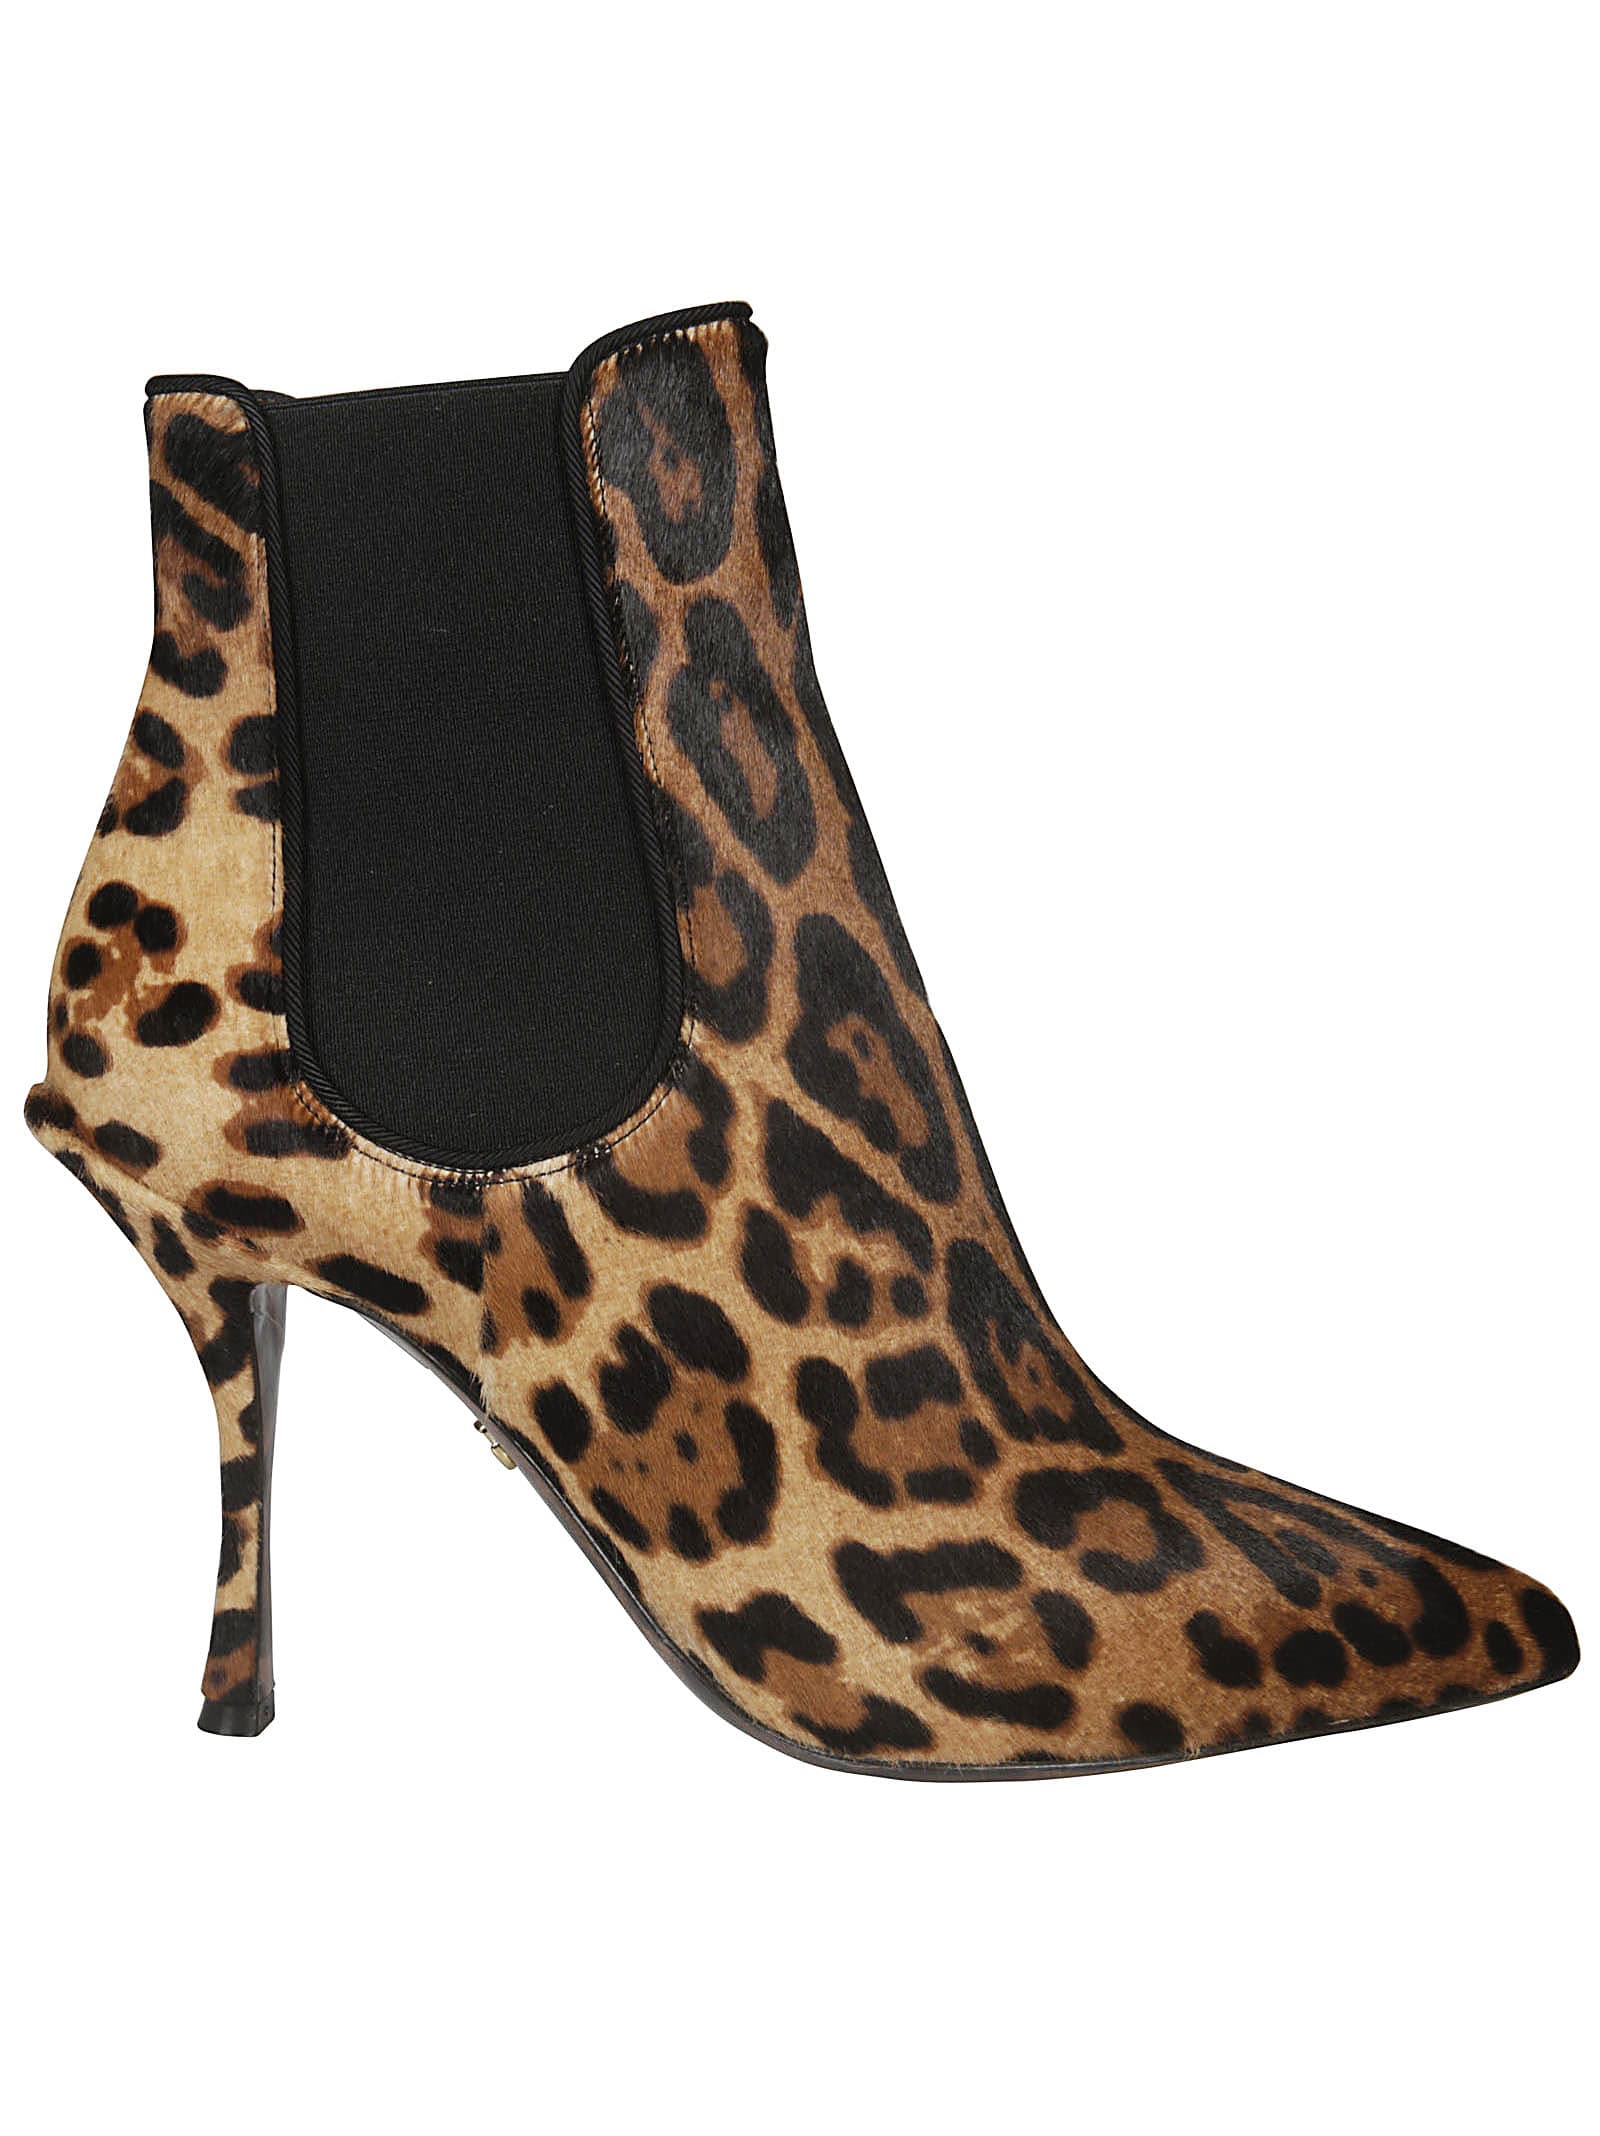 Dolce & Gabbana Printed Ankle Boots